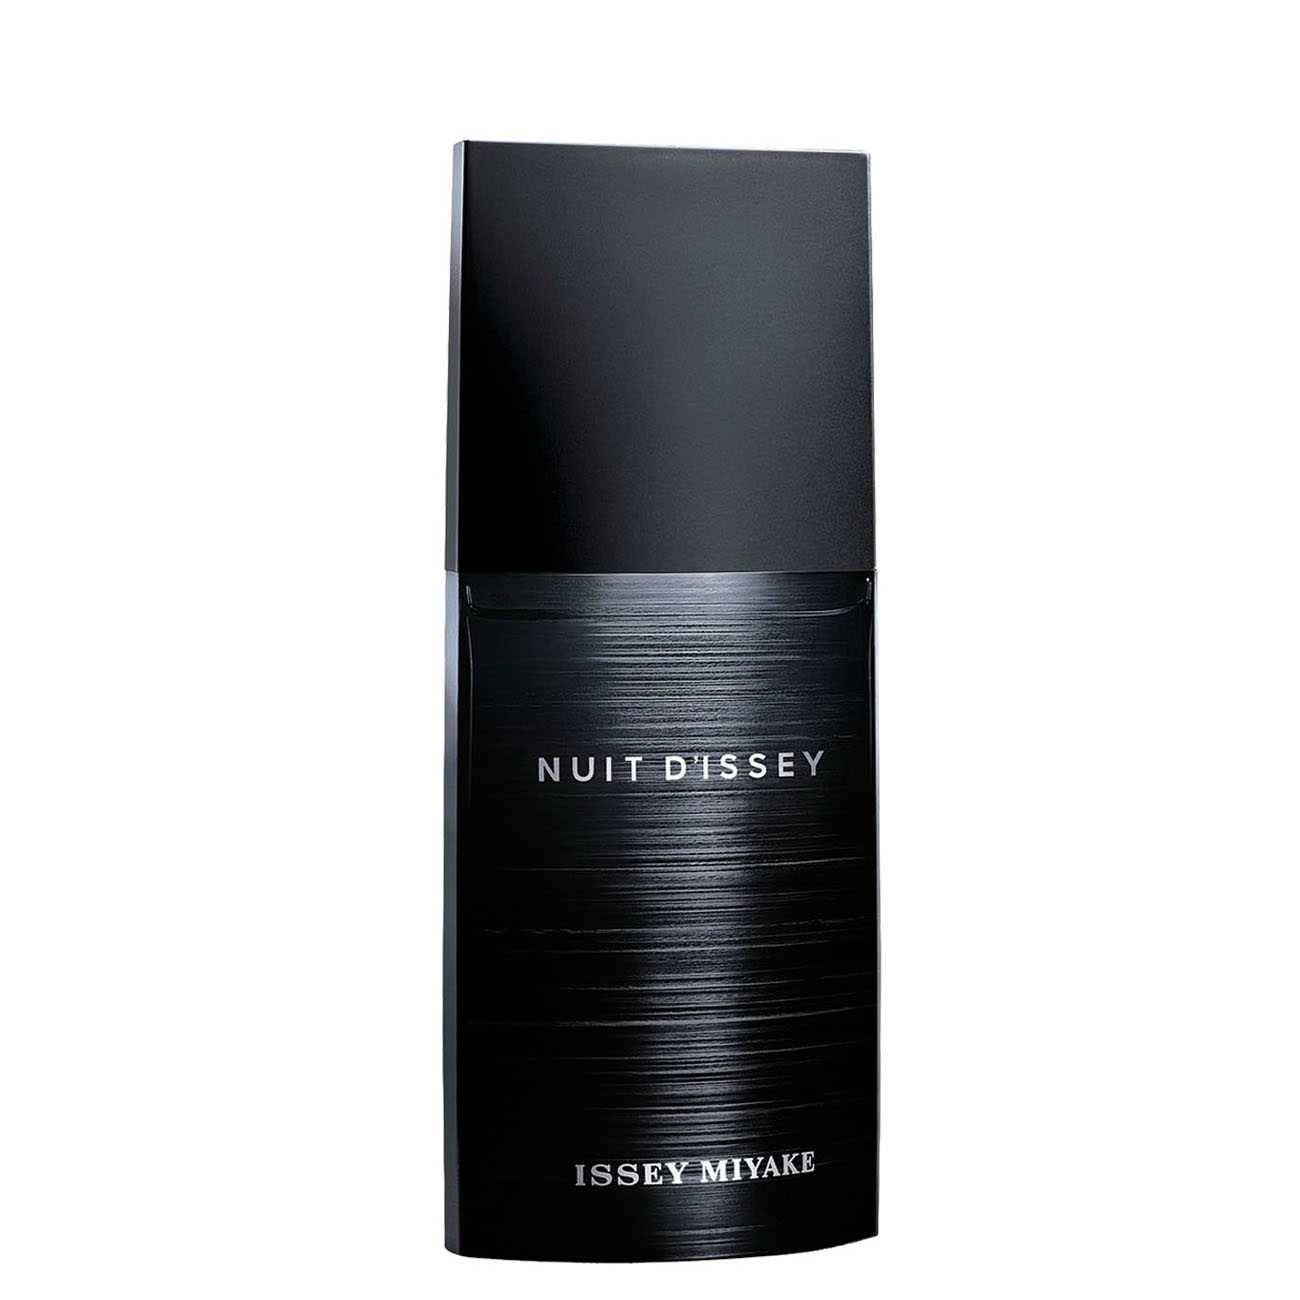 NUIT D'ISSEY 125ml poza